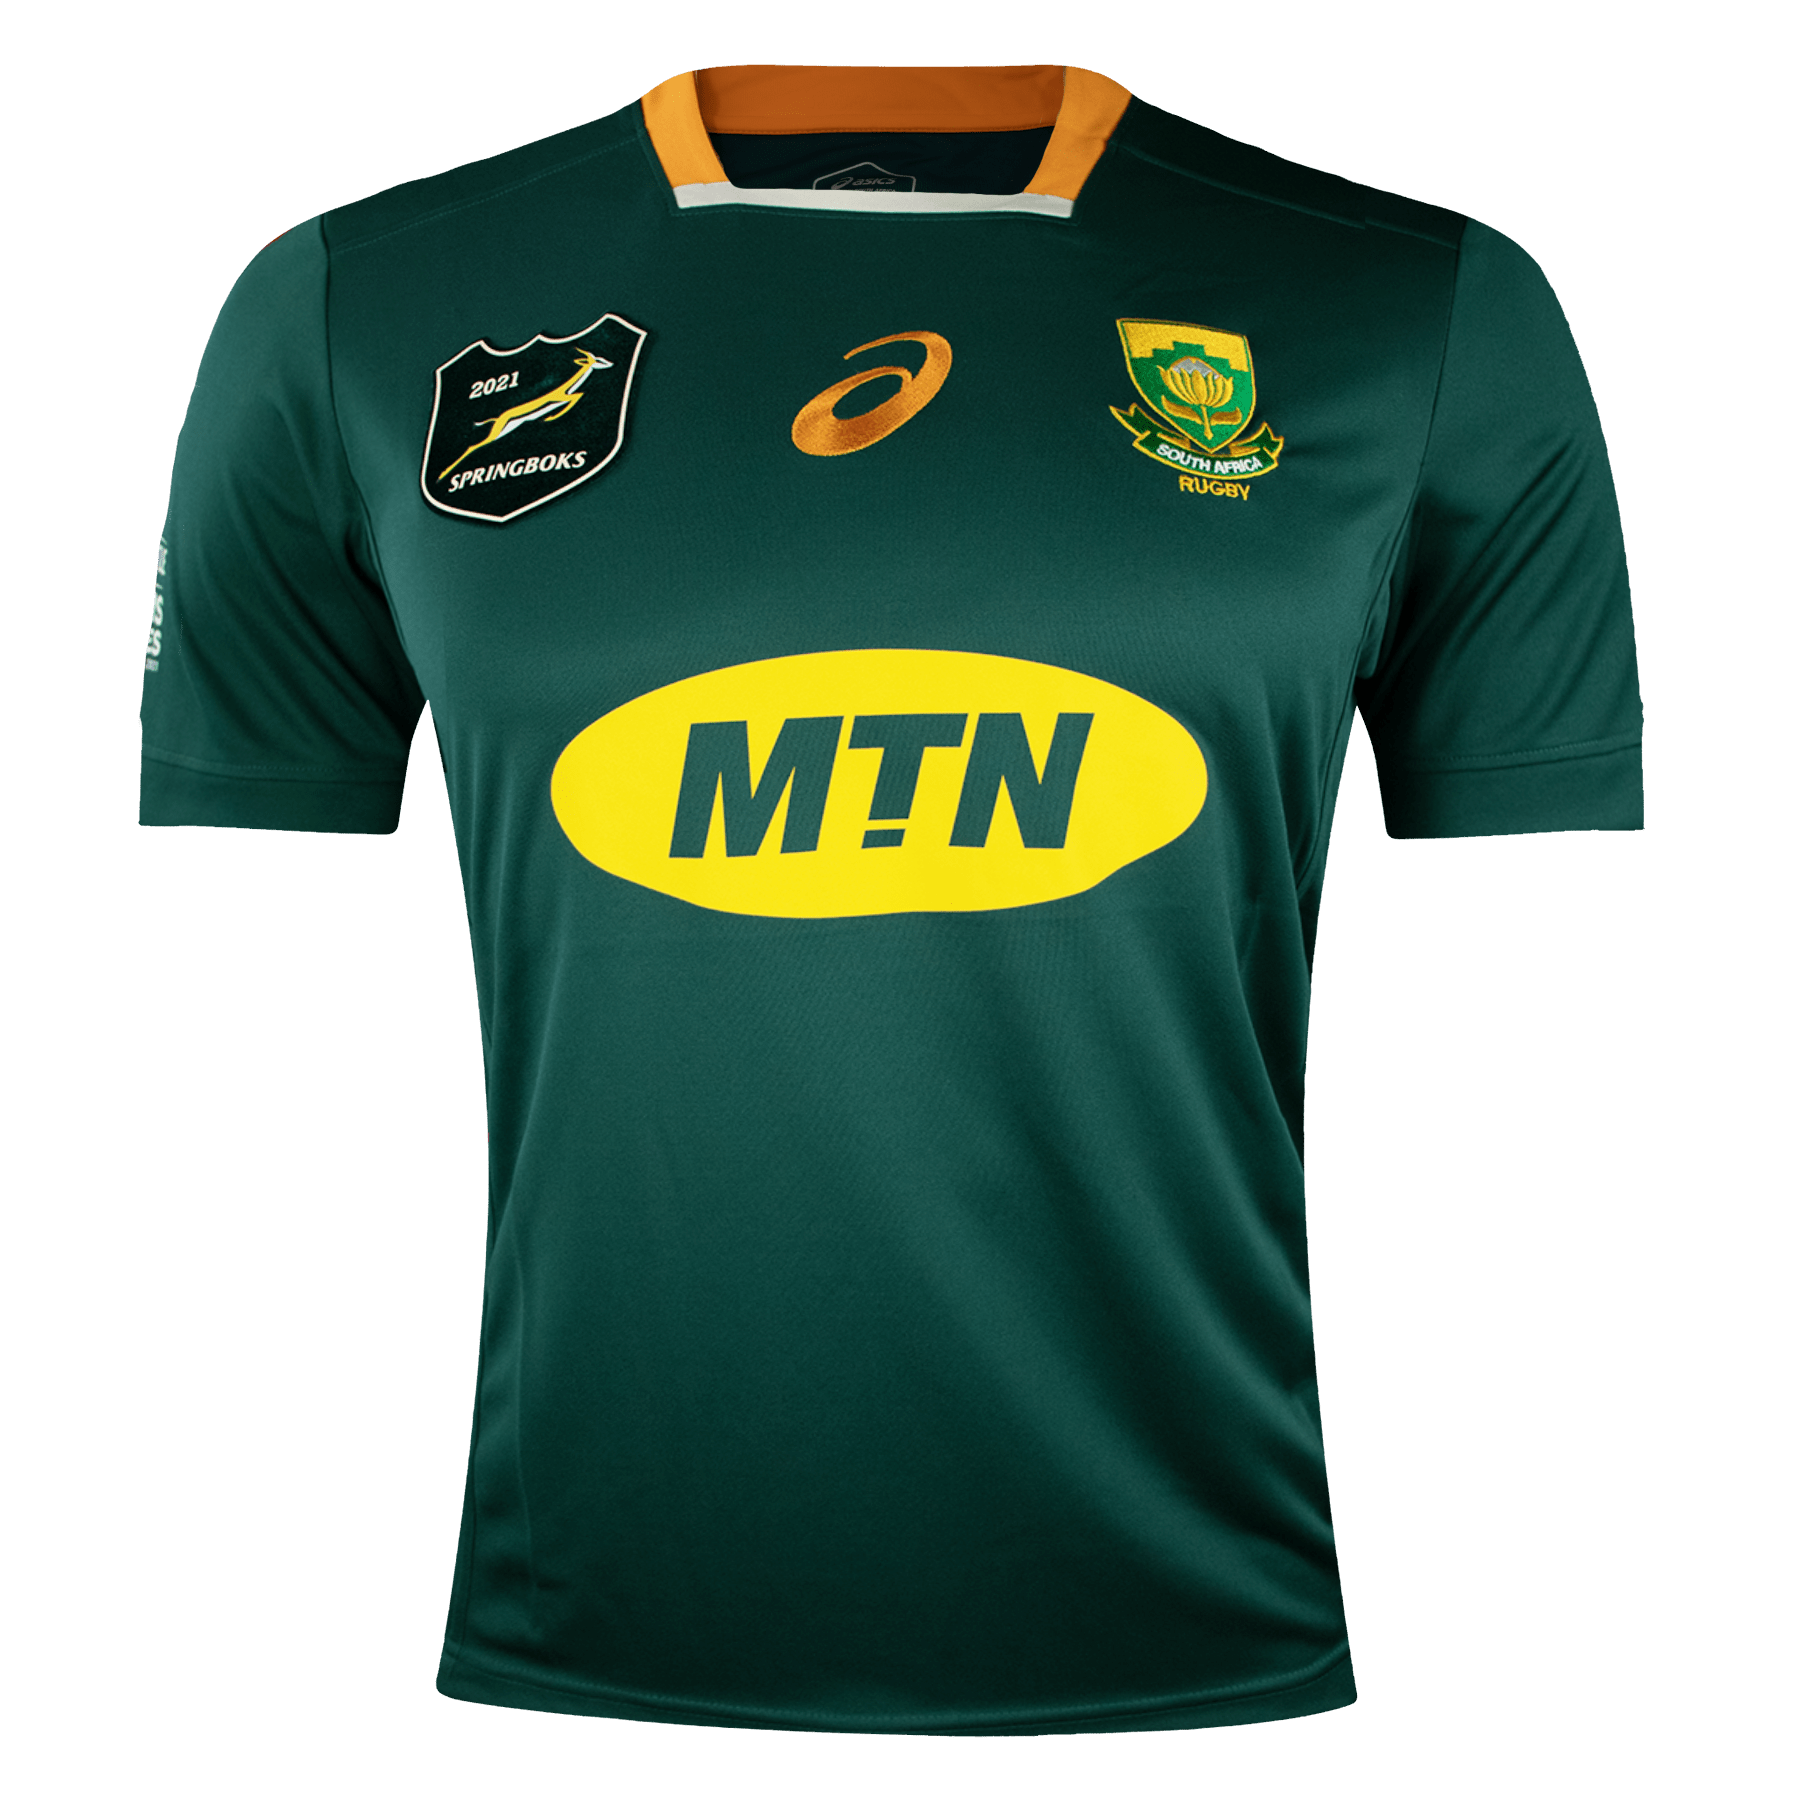 sa rugby online store